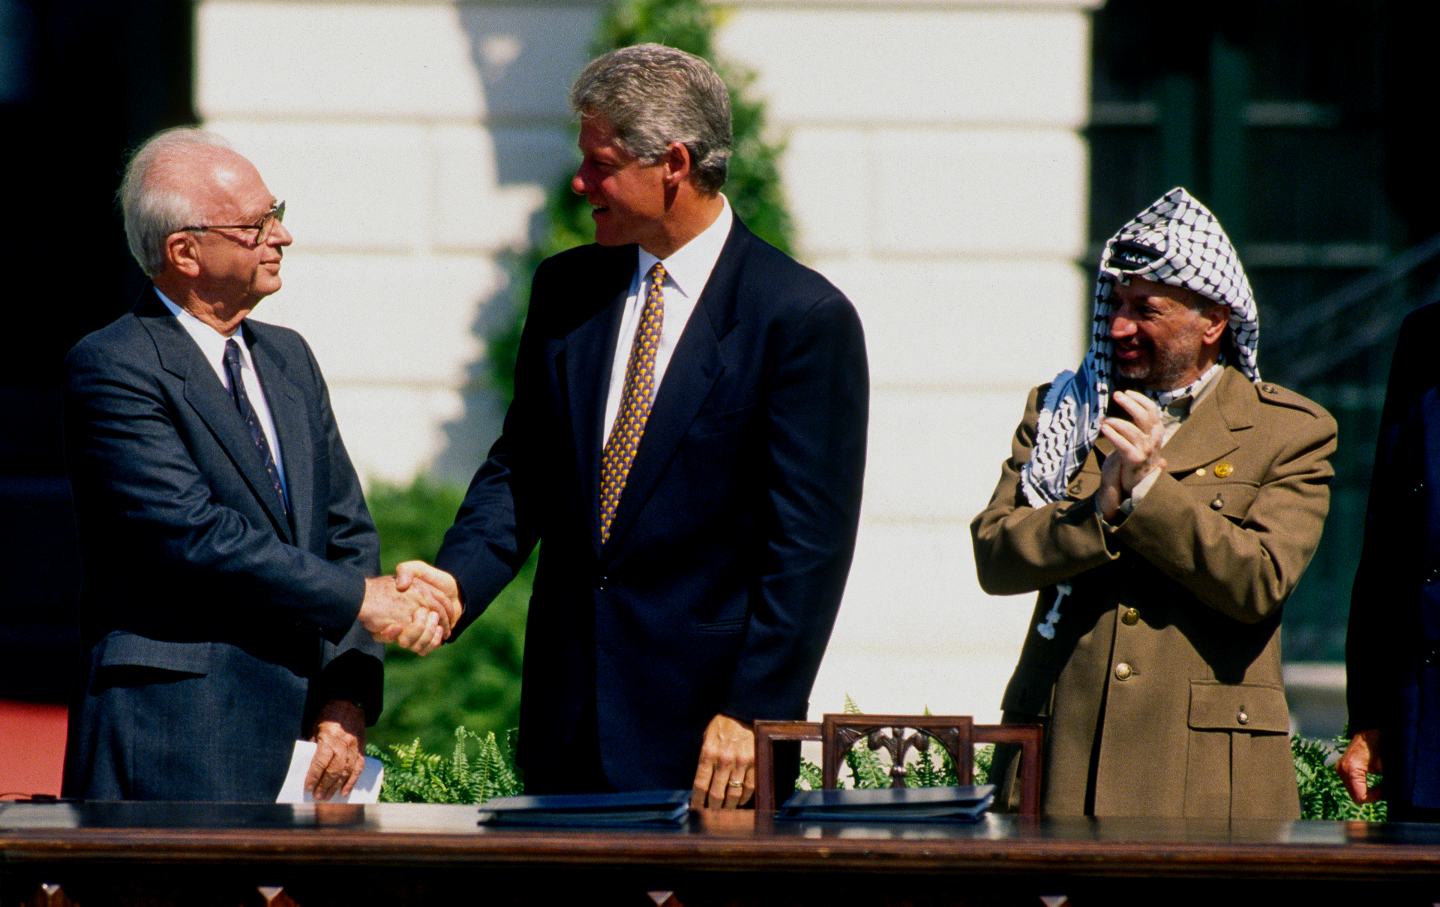 Palestine Liberation Organization (PLO) Chairman Yasser Arafat applauds Israeli Prime Minister Yitzhak Rabin and US President Bill Clinton at the signing of the Oslo I Accord on the White House's South Lawn, Washington DC, September 13, 1993.